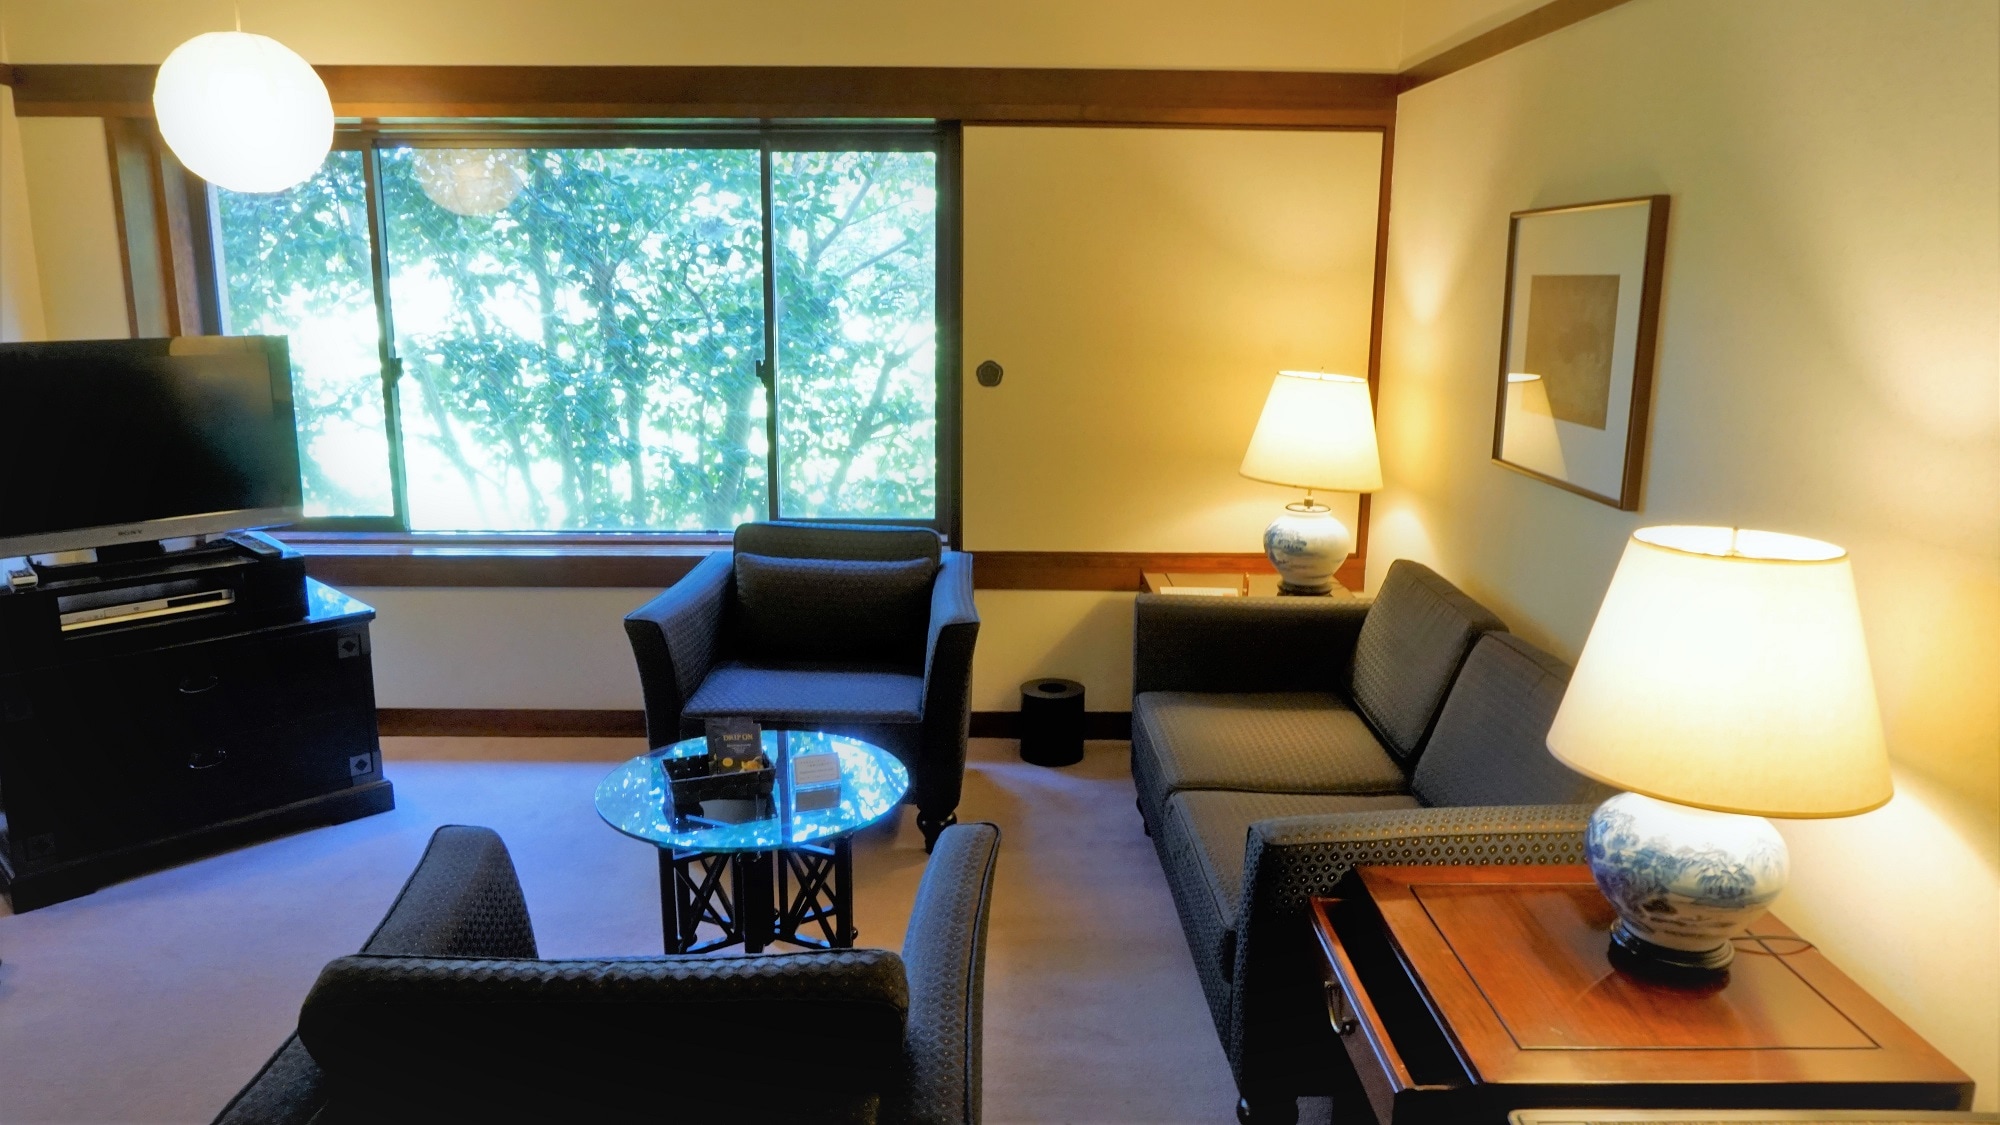 The living room of the Japanese-style suite is laid out with classical furnishings.